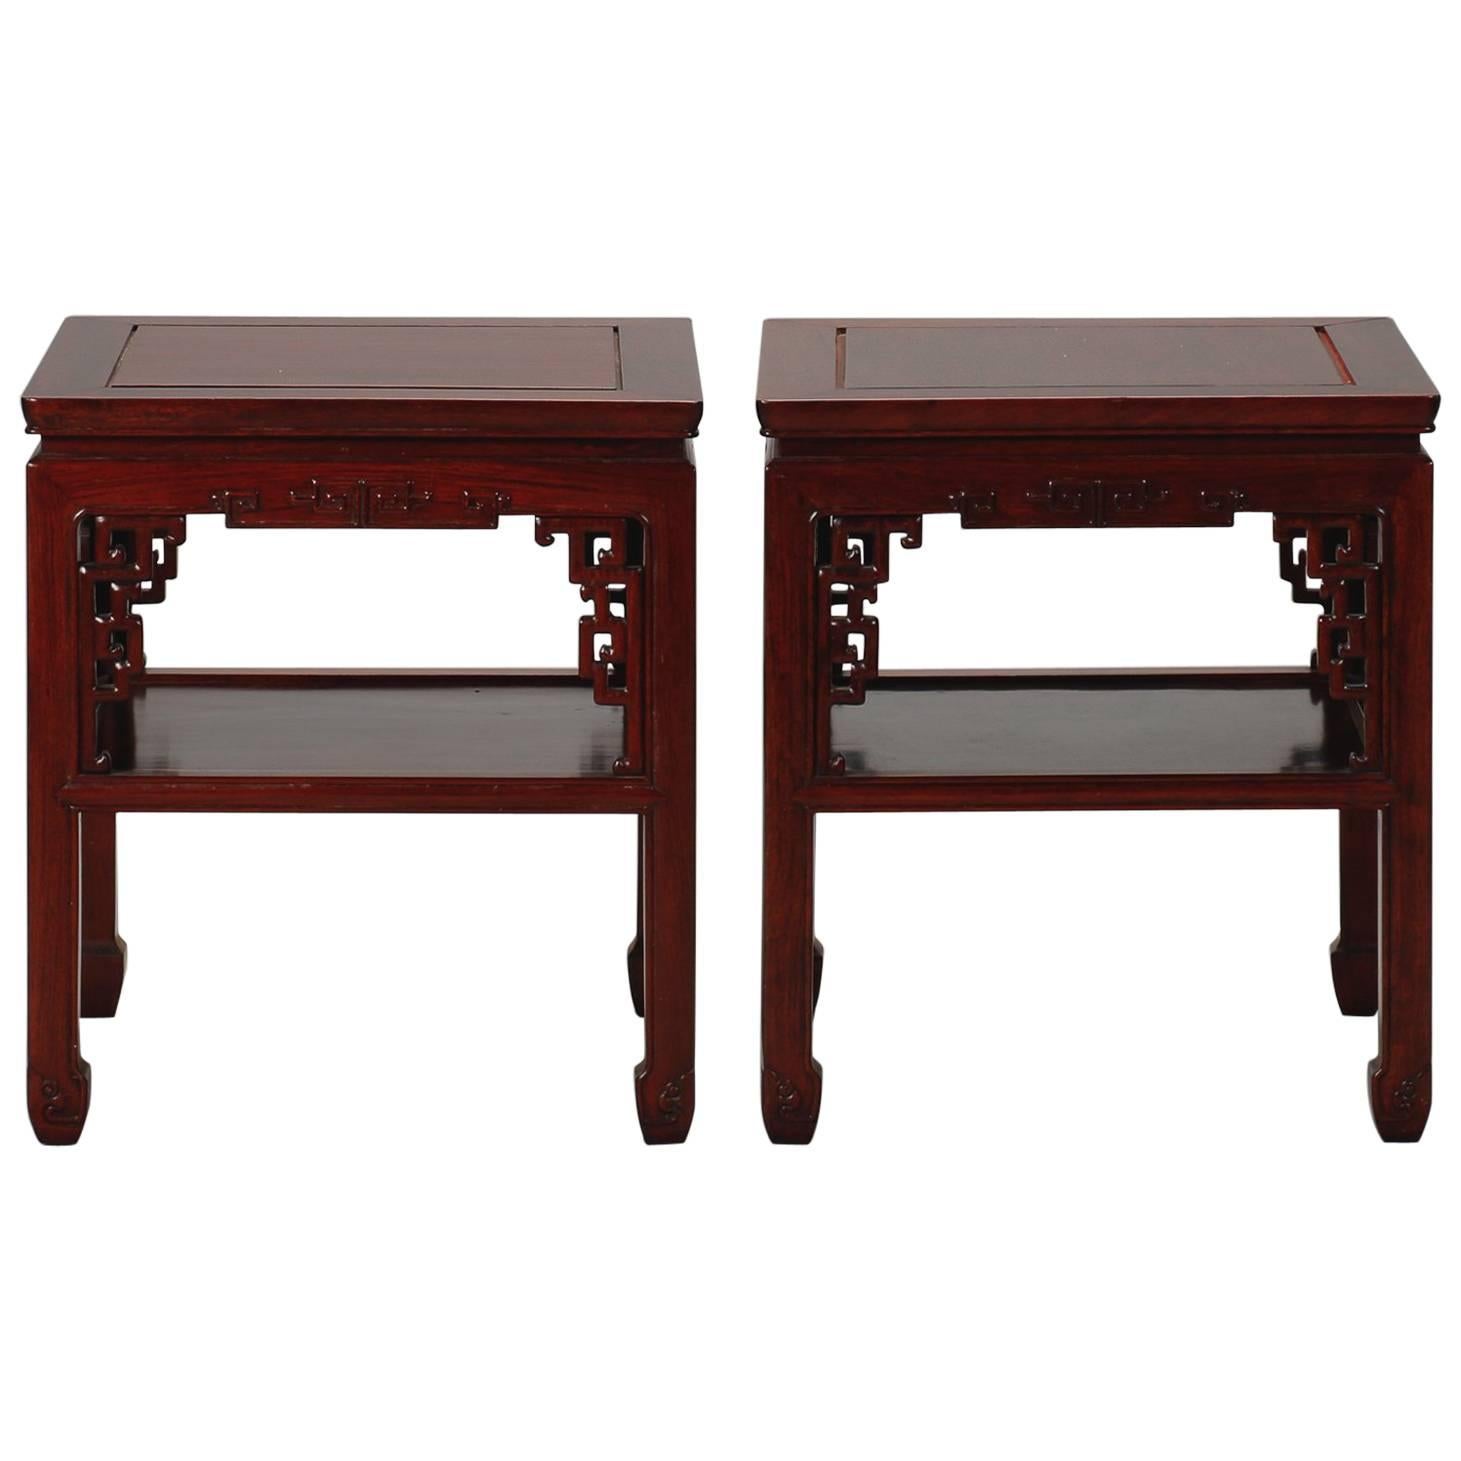 Pair of 1930s Chinese Carved Side Tables